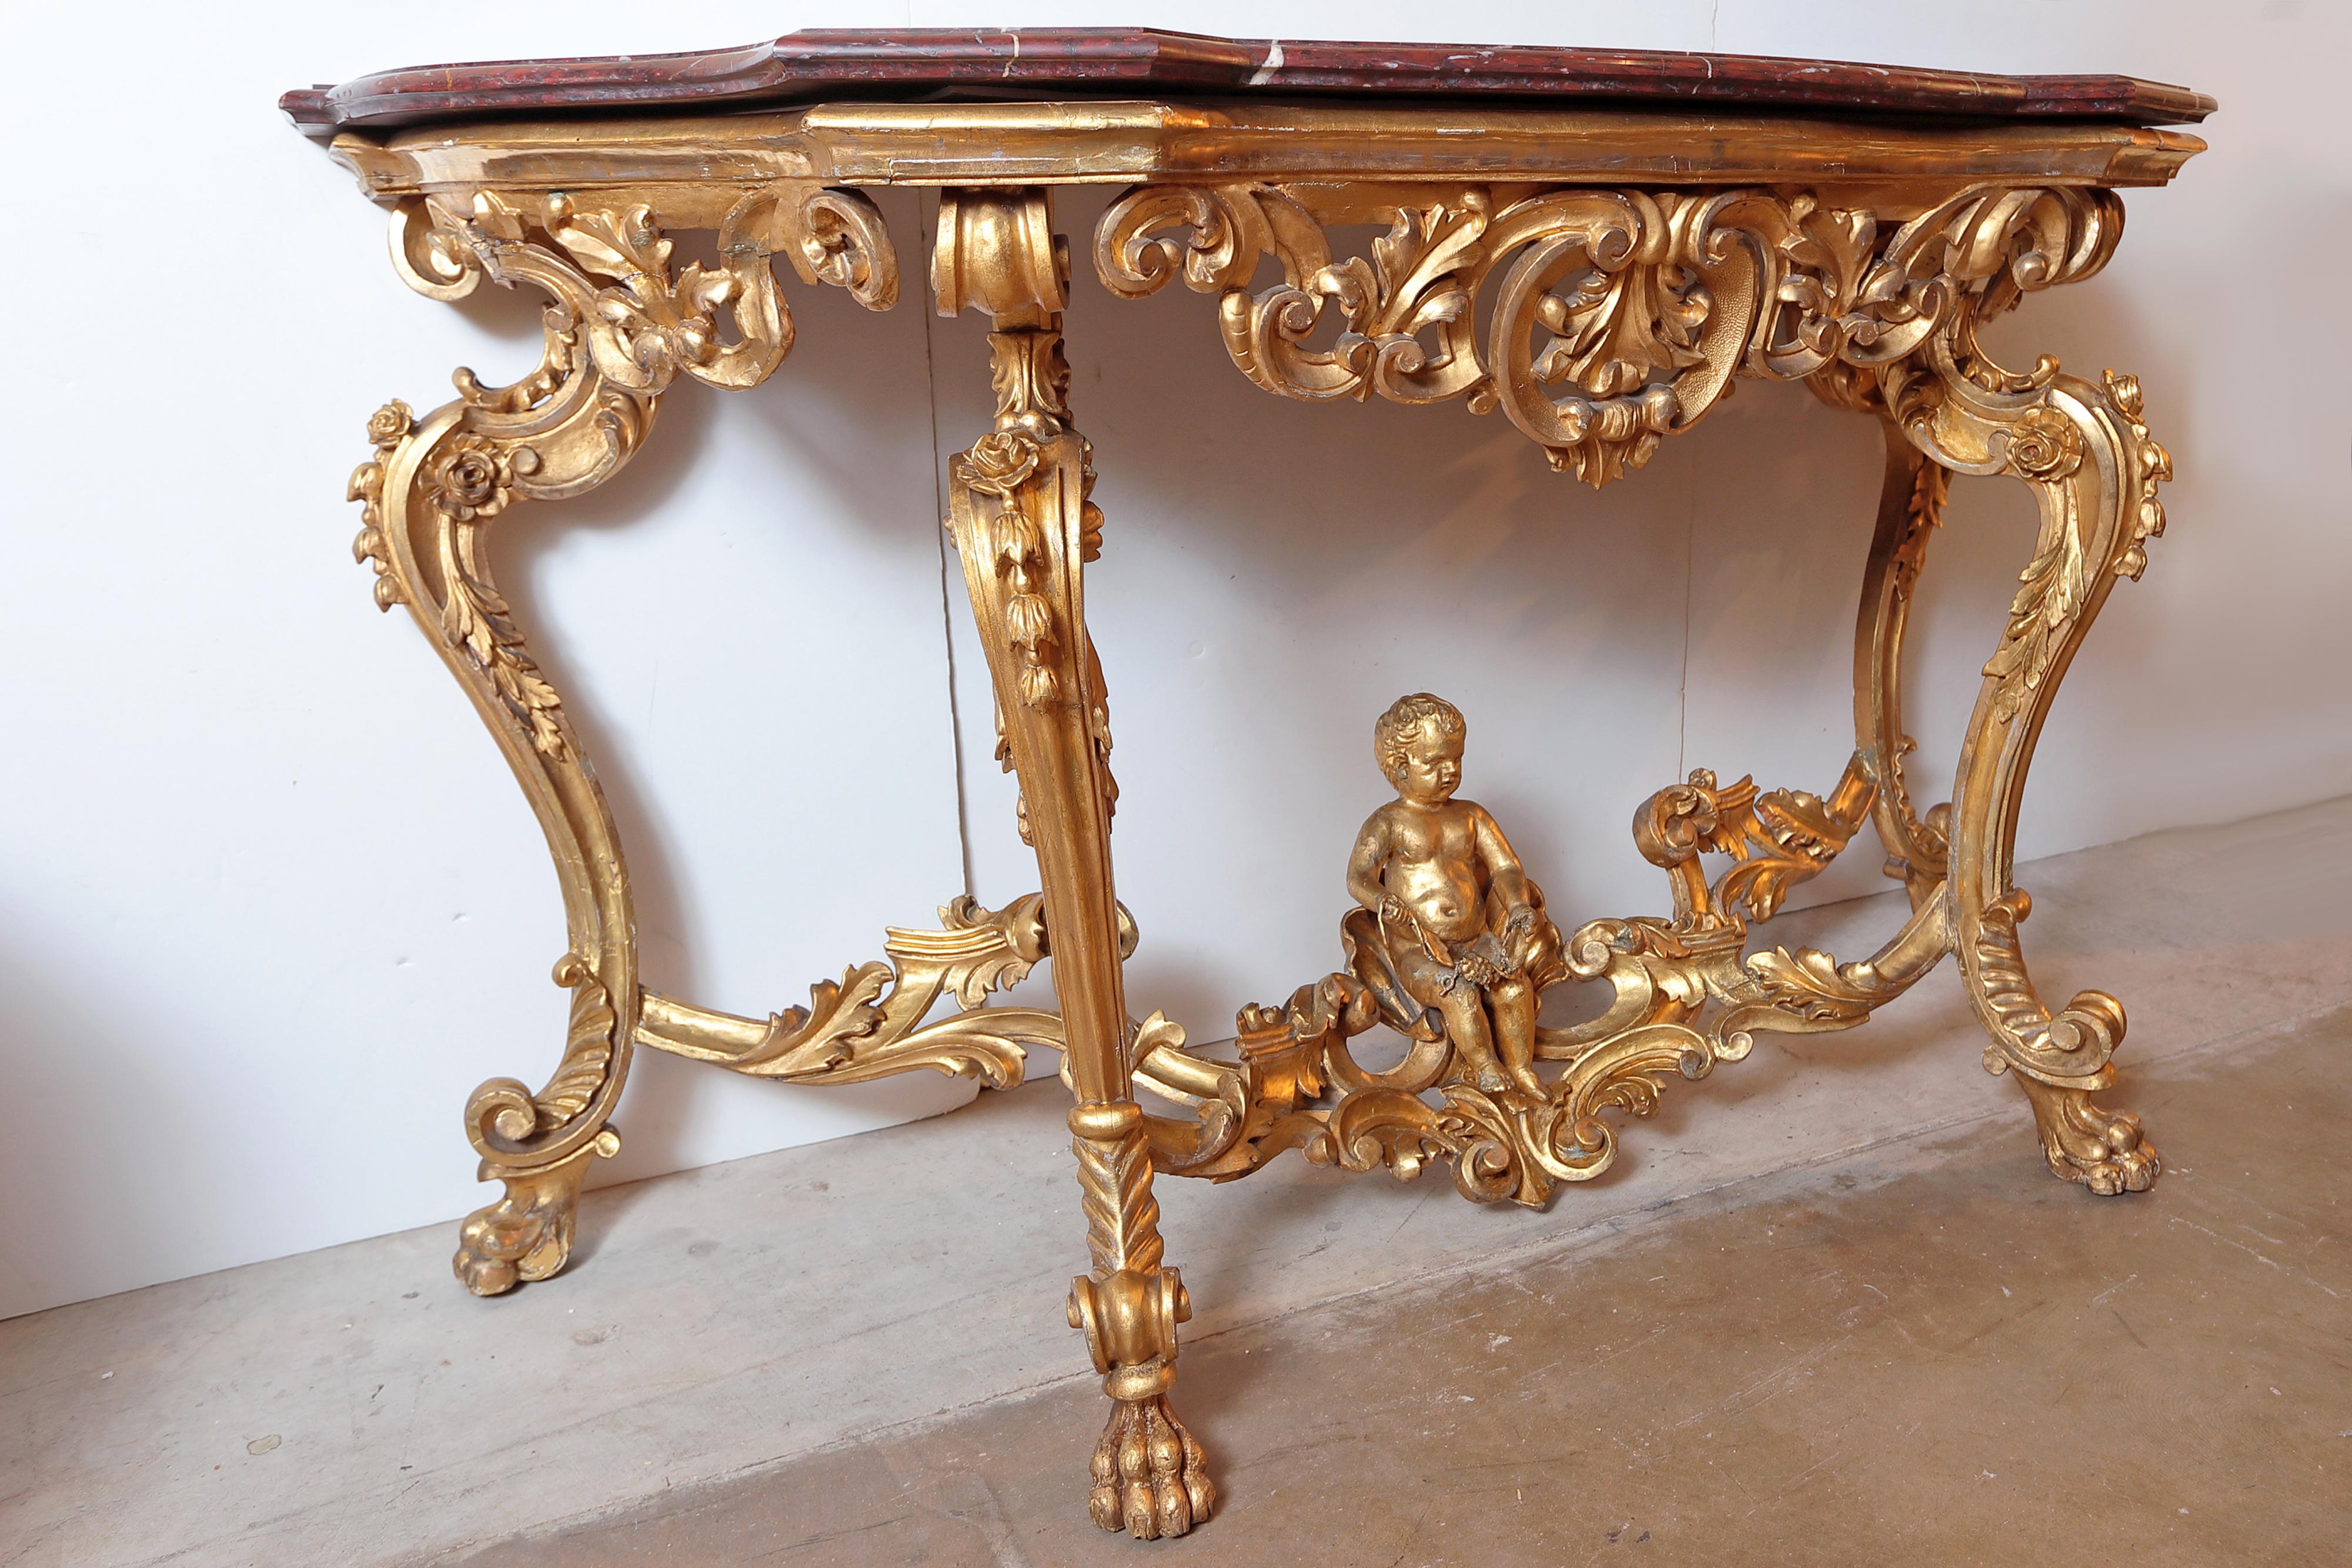 18th century French Louis XV carved console with the original water gilding. Finely detailed with elaborate carving and a large cherub on the stretcher base. The original Rosso marble top.